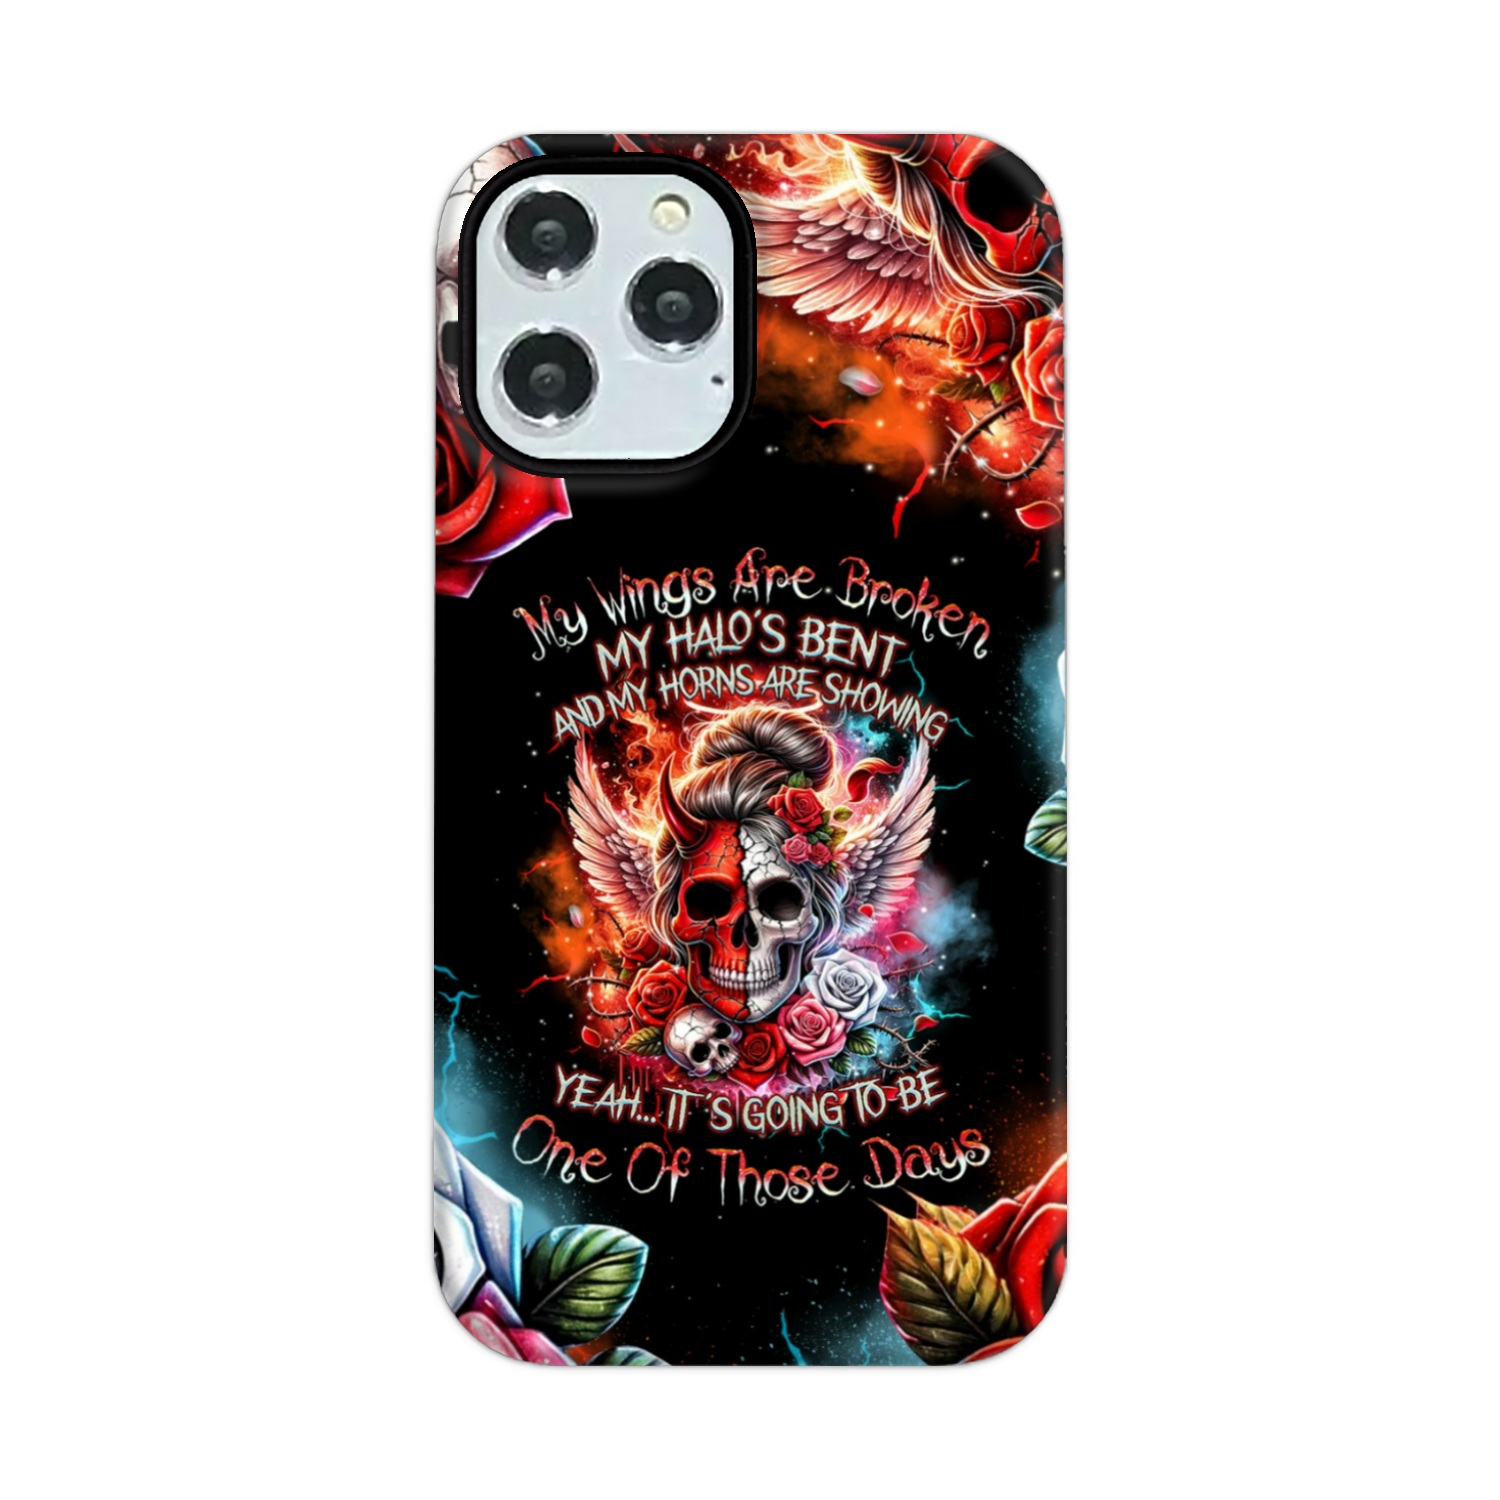 IT'S GOING TO BE ONE OF THOSE DAYS PHONE CASE - TYQY2703244